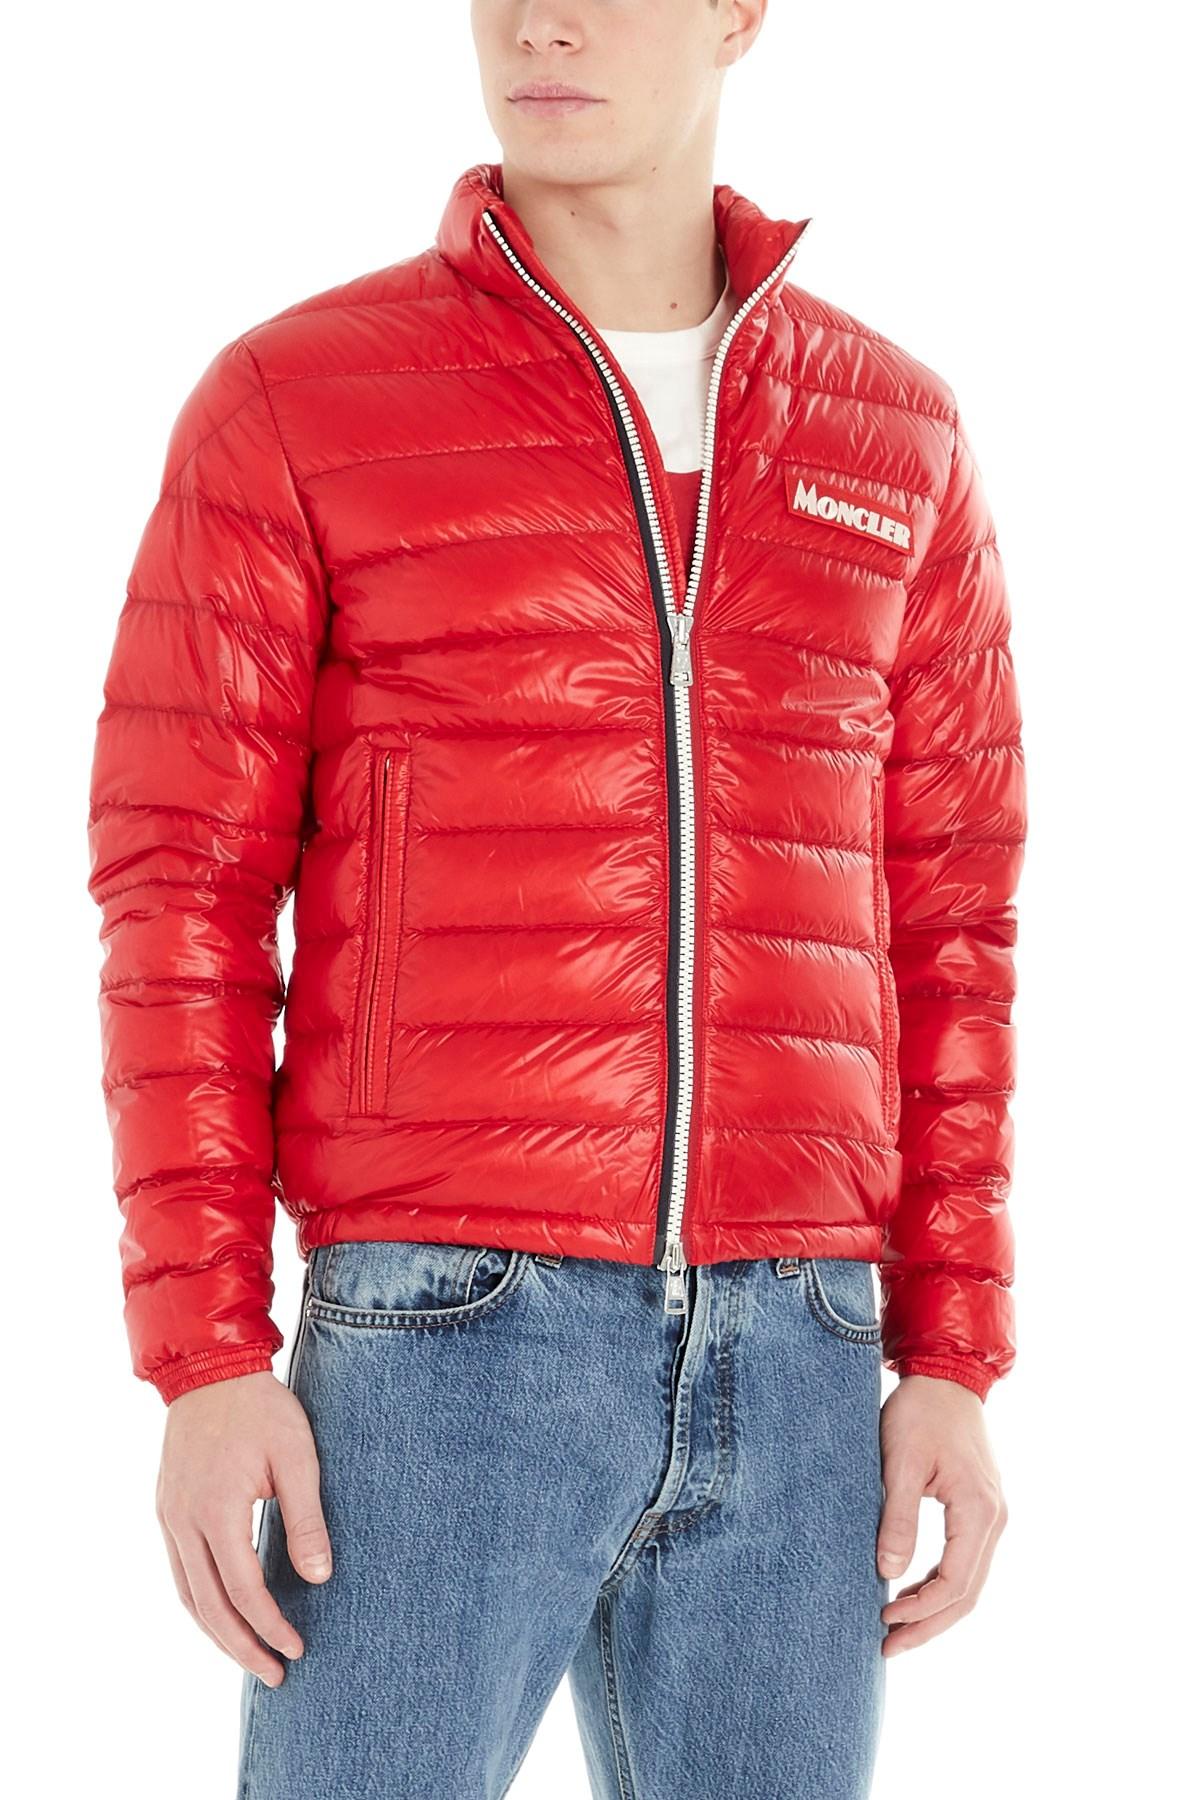 Moncler Synthetic Red Petichet Jacket for Men - Save 41% - Lyst